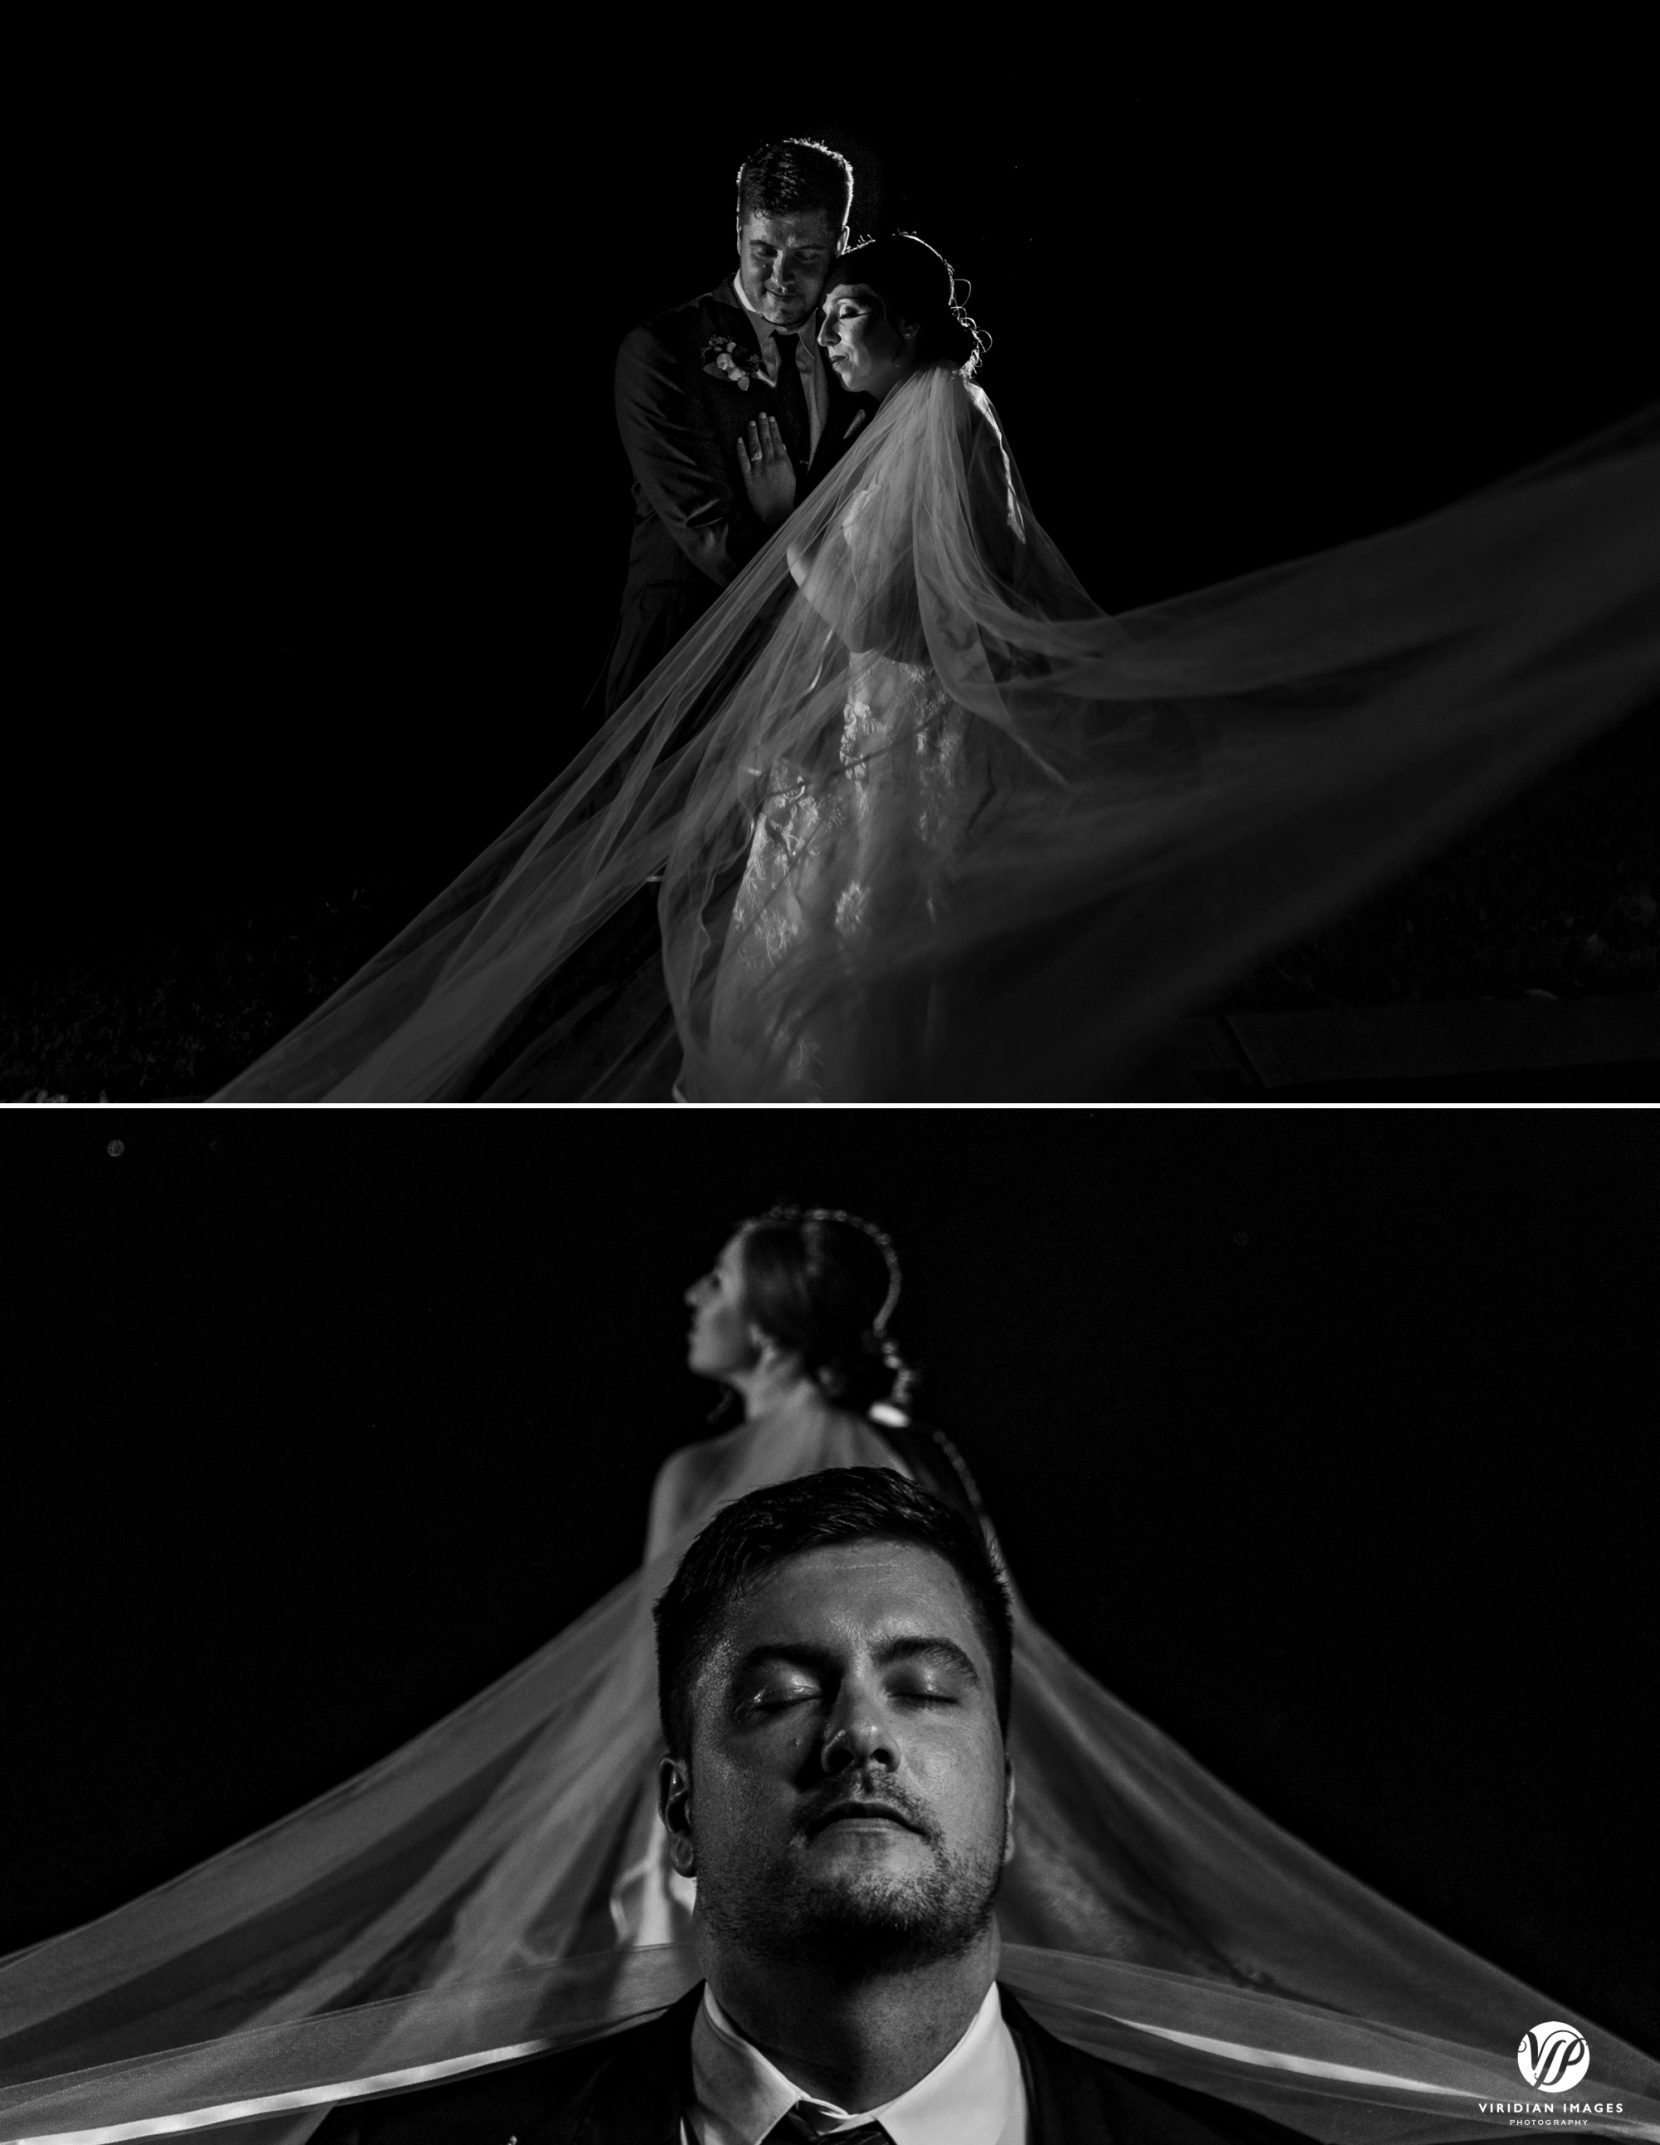 creative nighttime portraits with bride and groom in black and white